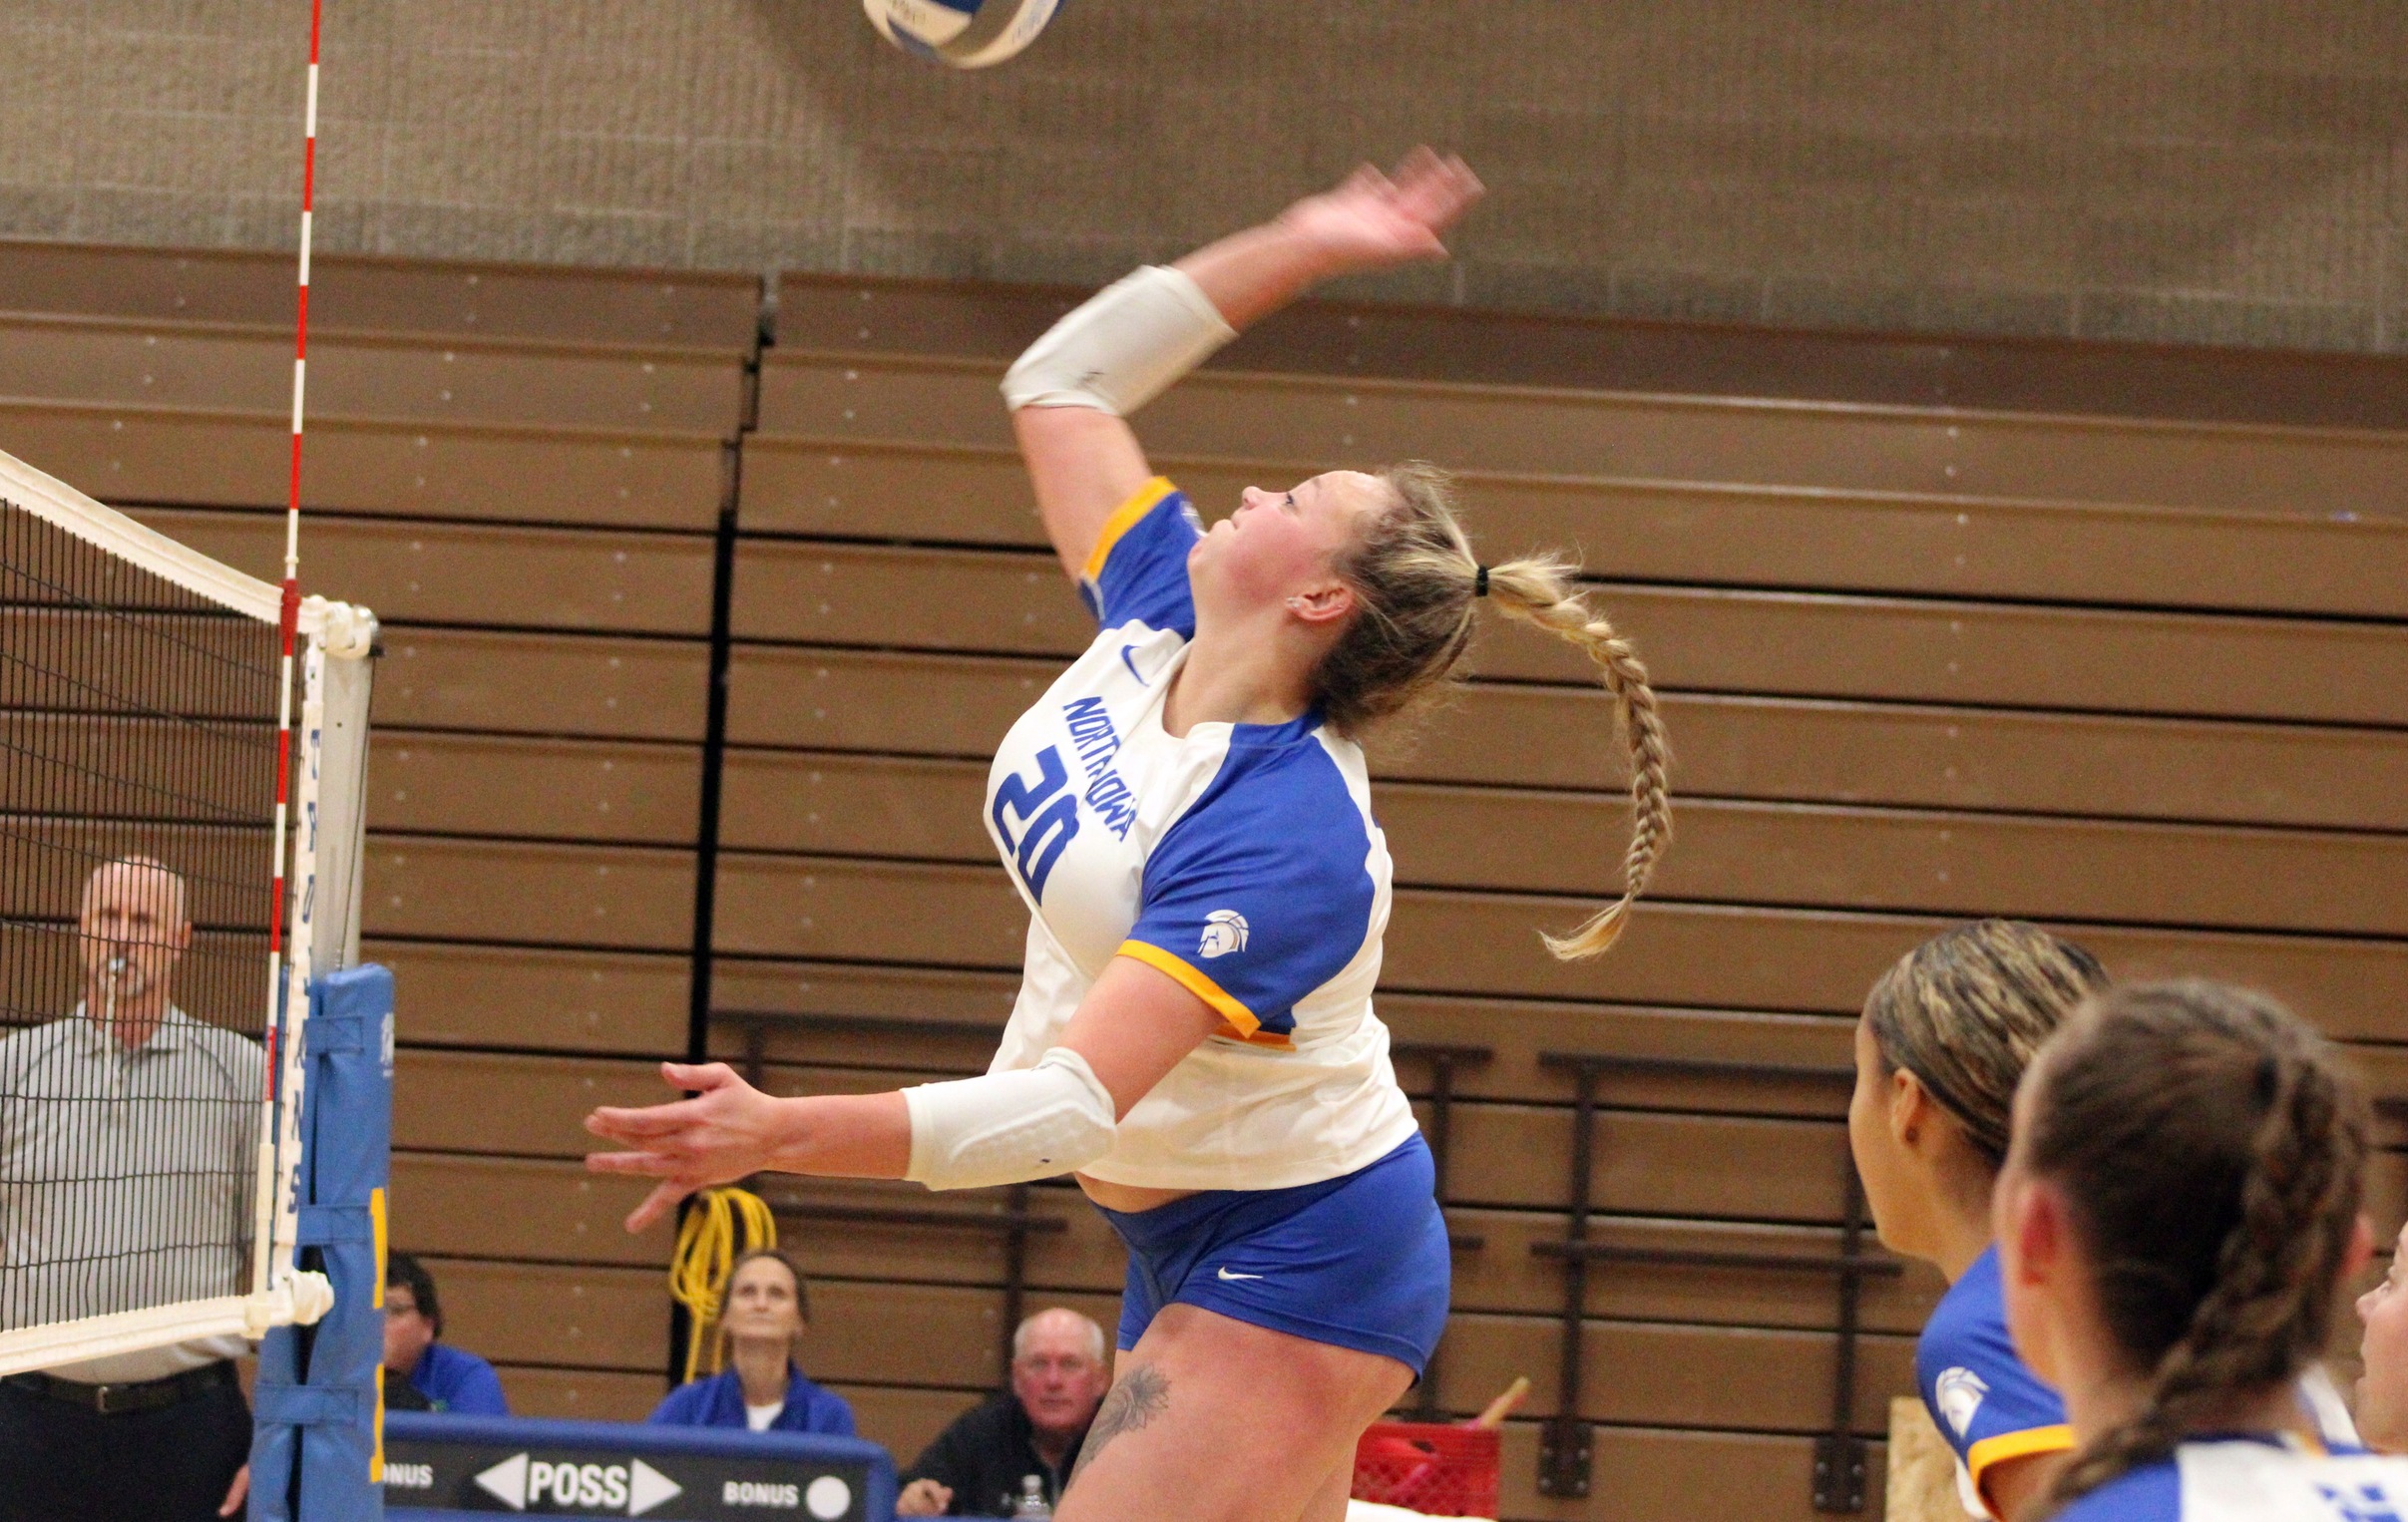 NIACC's Kyla Moore hits the ball over the net during Wednesday's ICCAC match against DMACC in the NIACC gym.